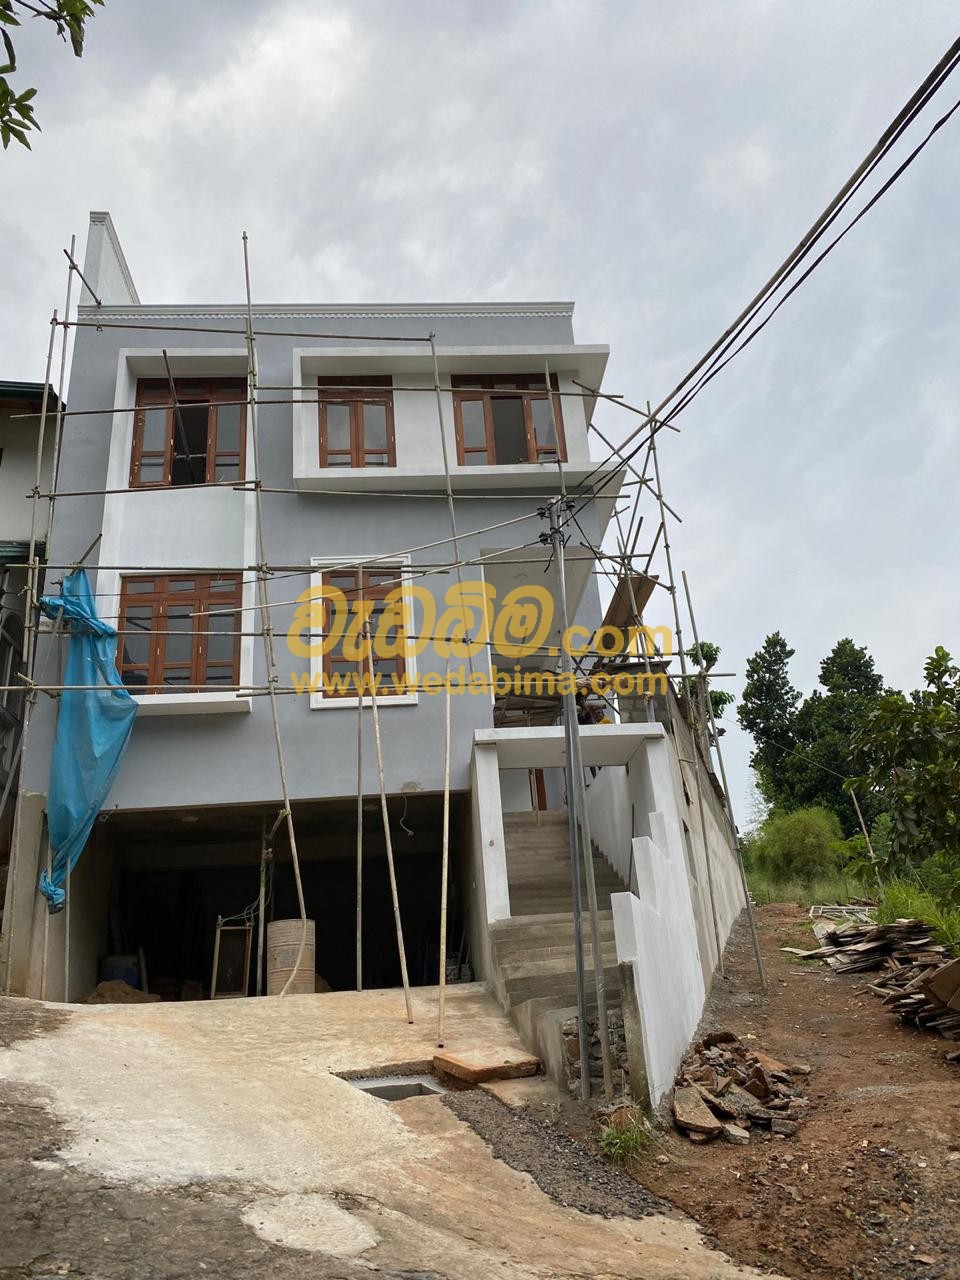 Home Construction Kandy